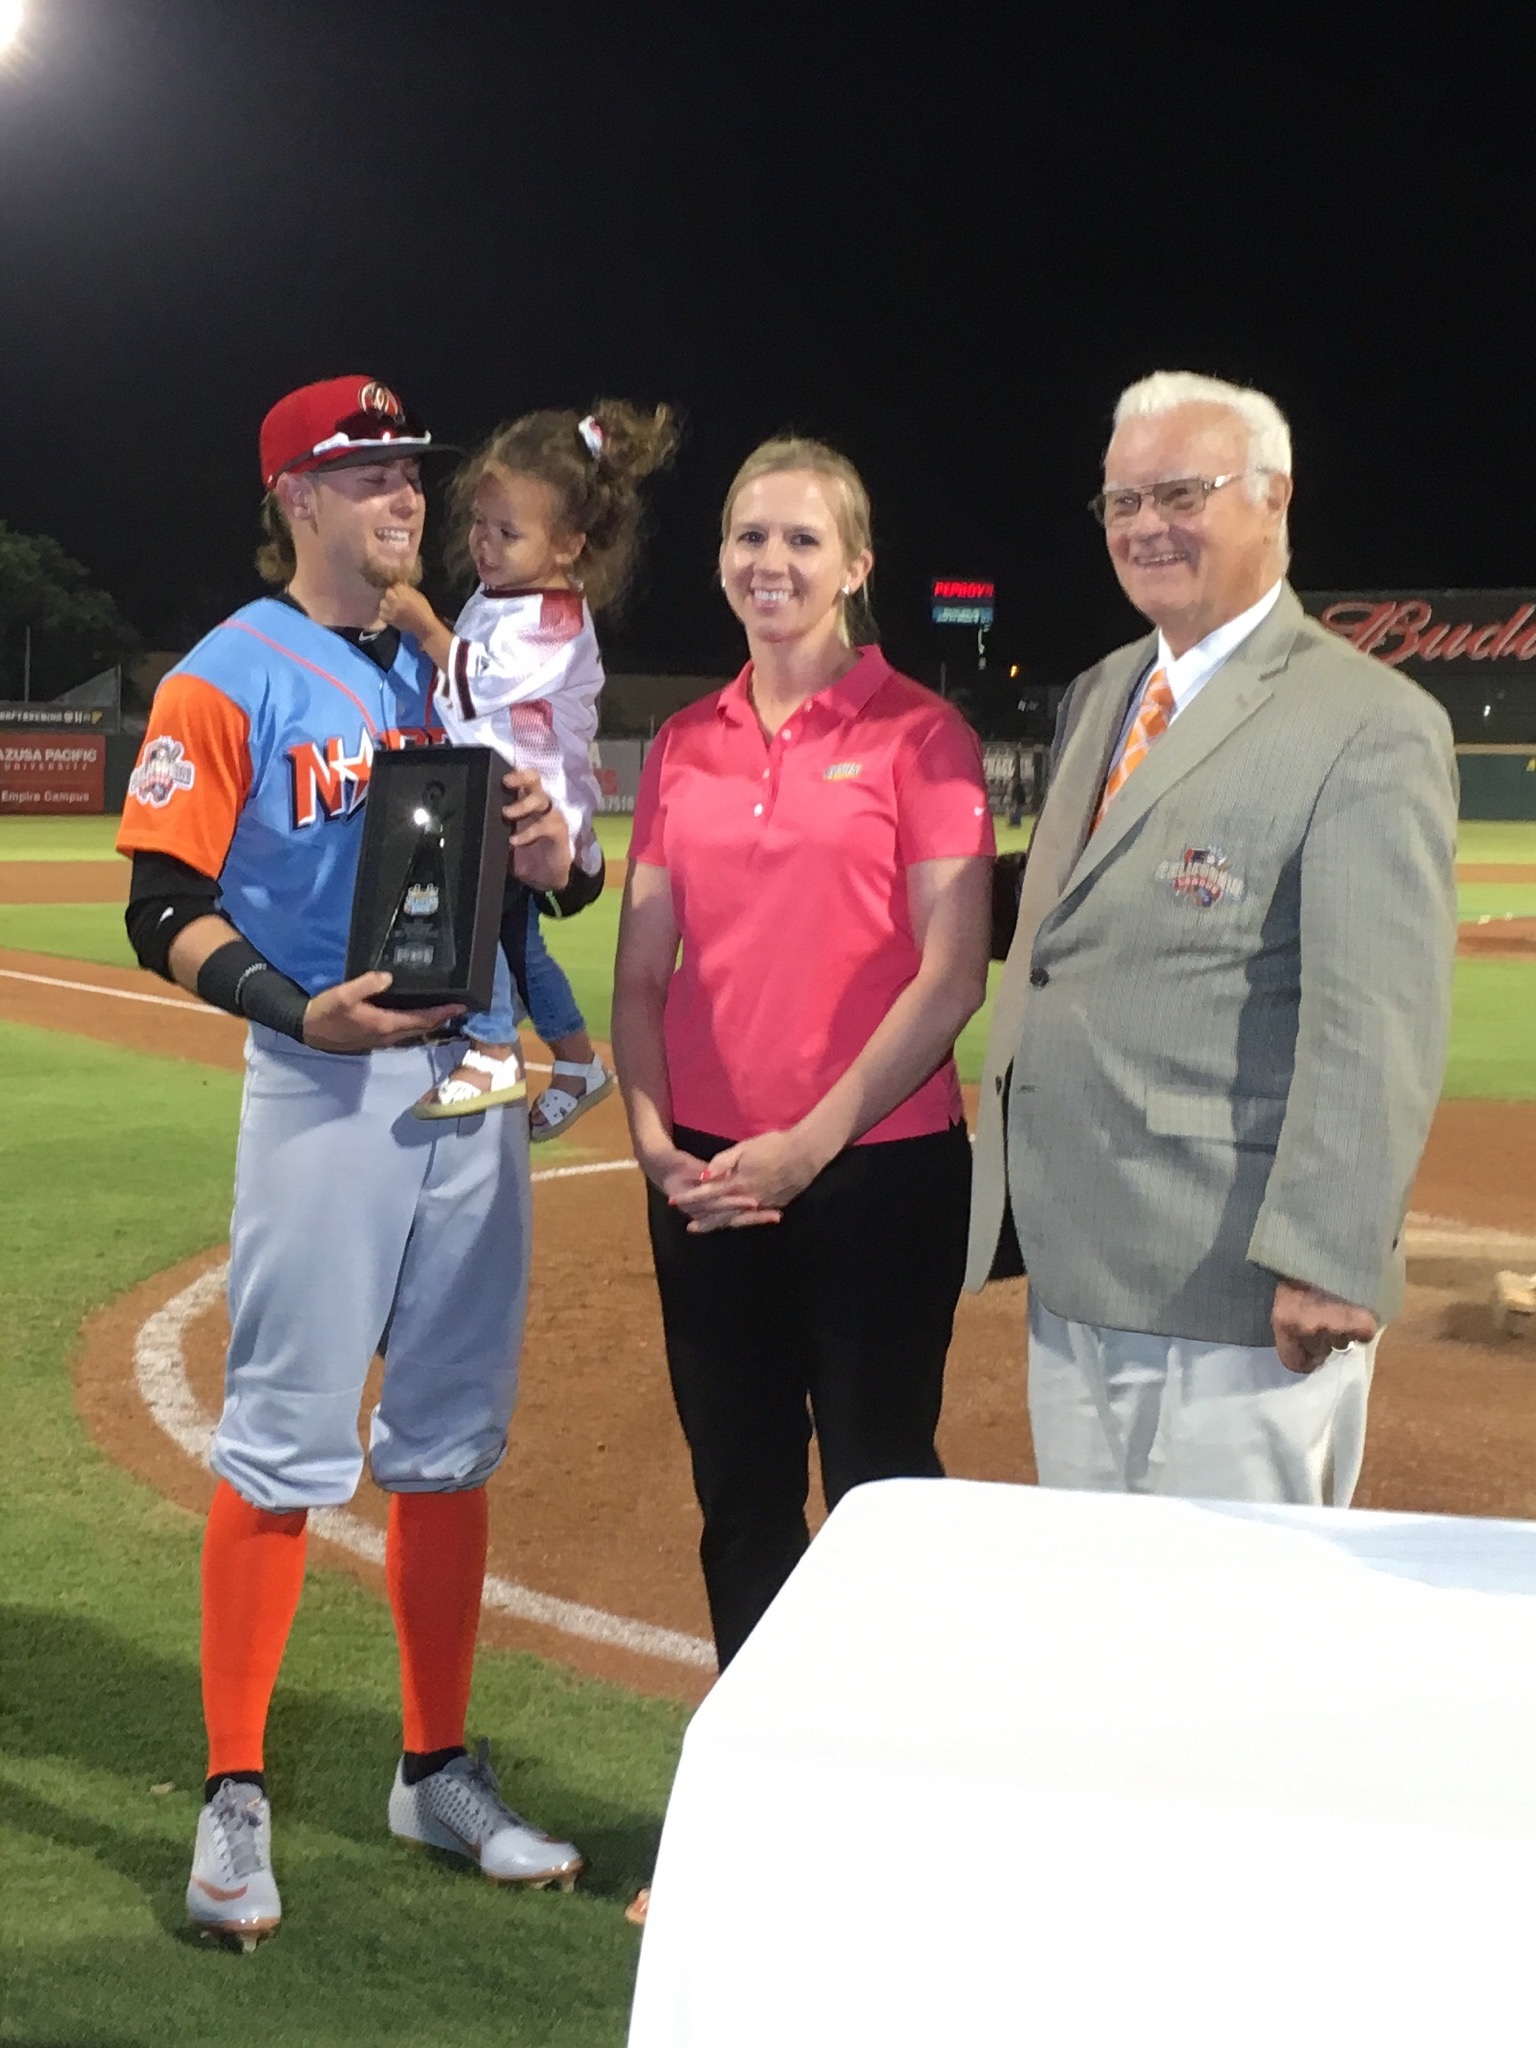 At The Ballpark: 2019 California League HR Derby and All-Star Game